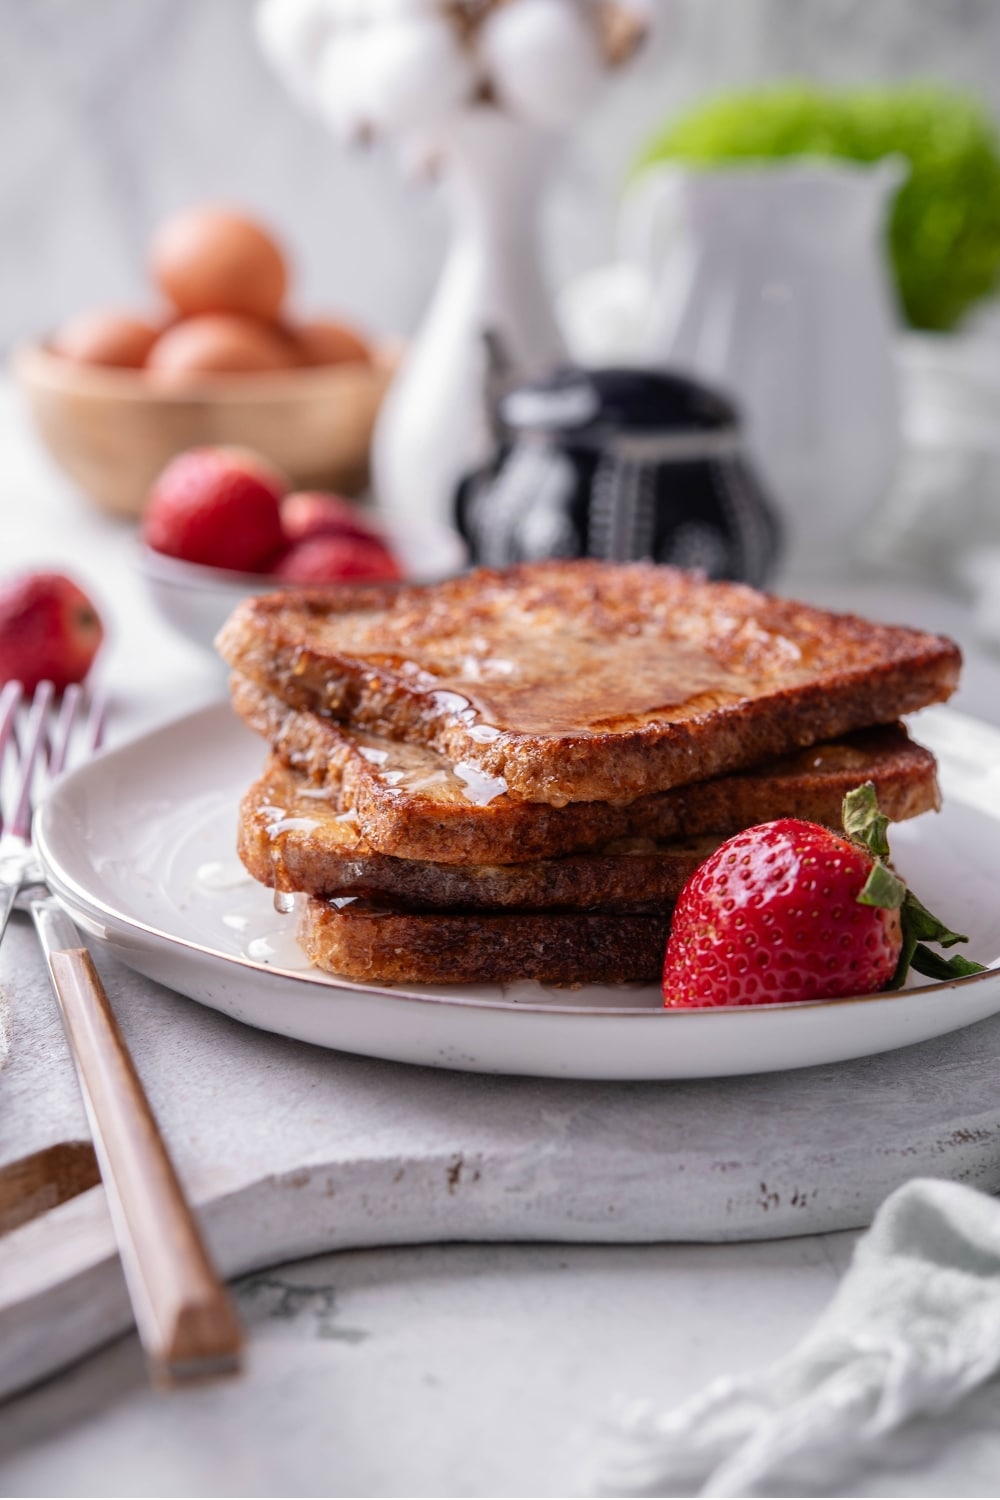 Four slices of french toast with syrup stacked on a white plate on top of a serving board. There is a strawberry and fork on the side.